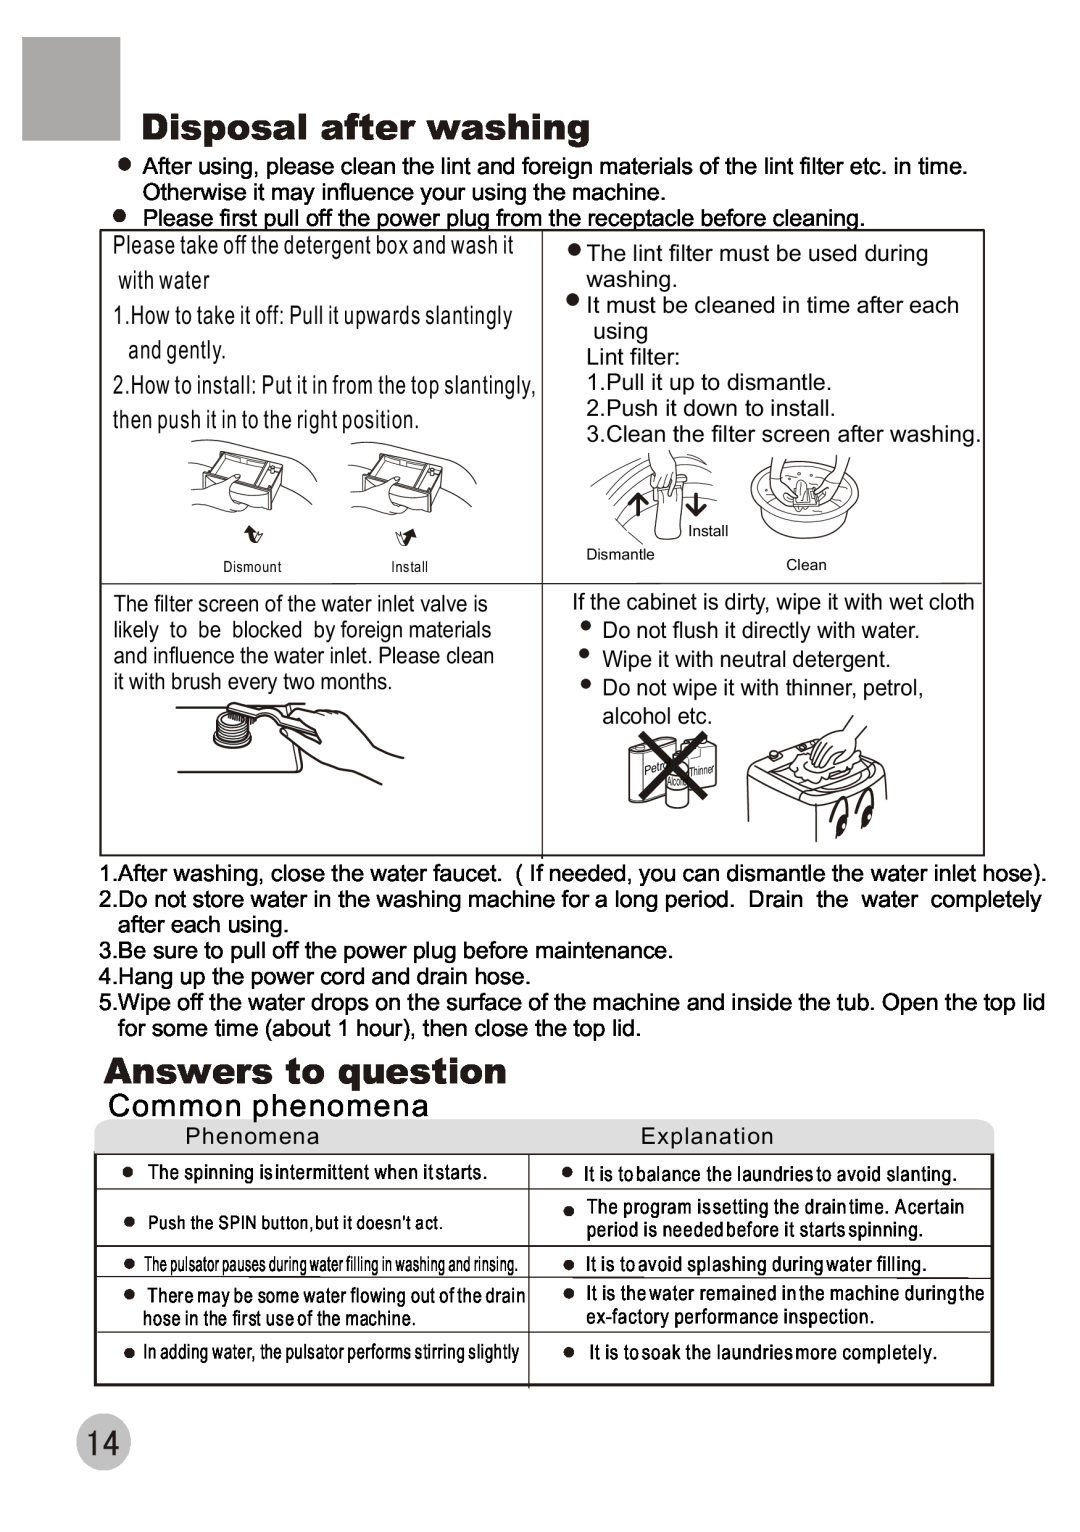 Haier HWM80-68B user manual Disposal after washing, Answers to question, Common phenomena 